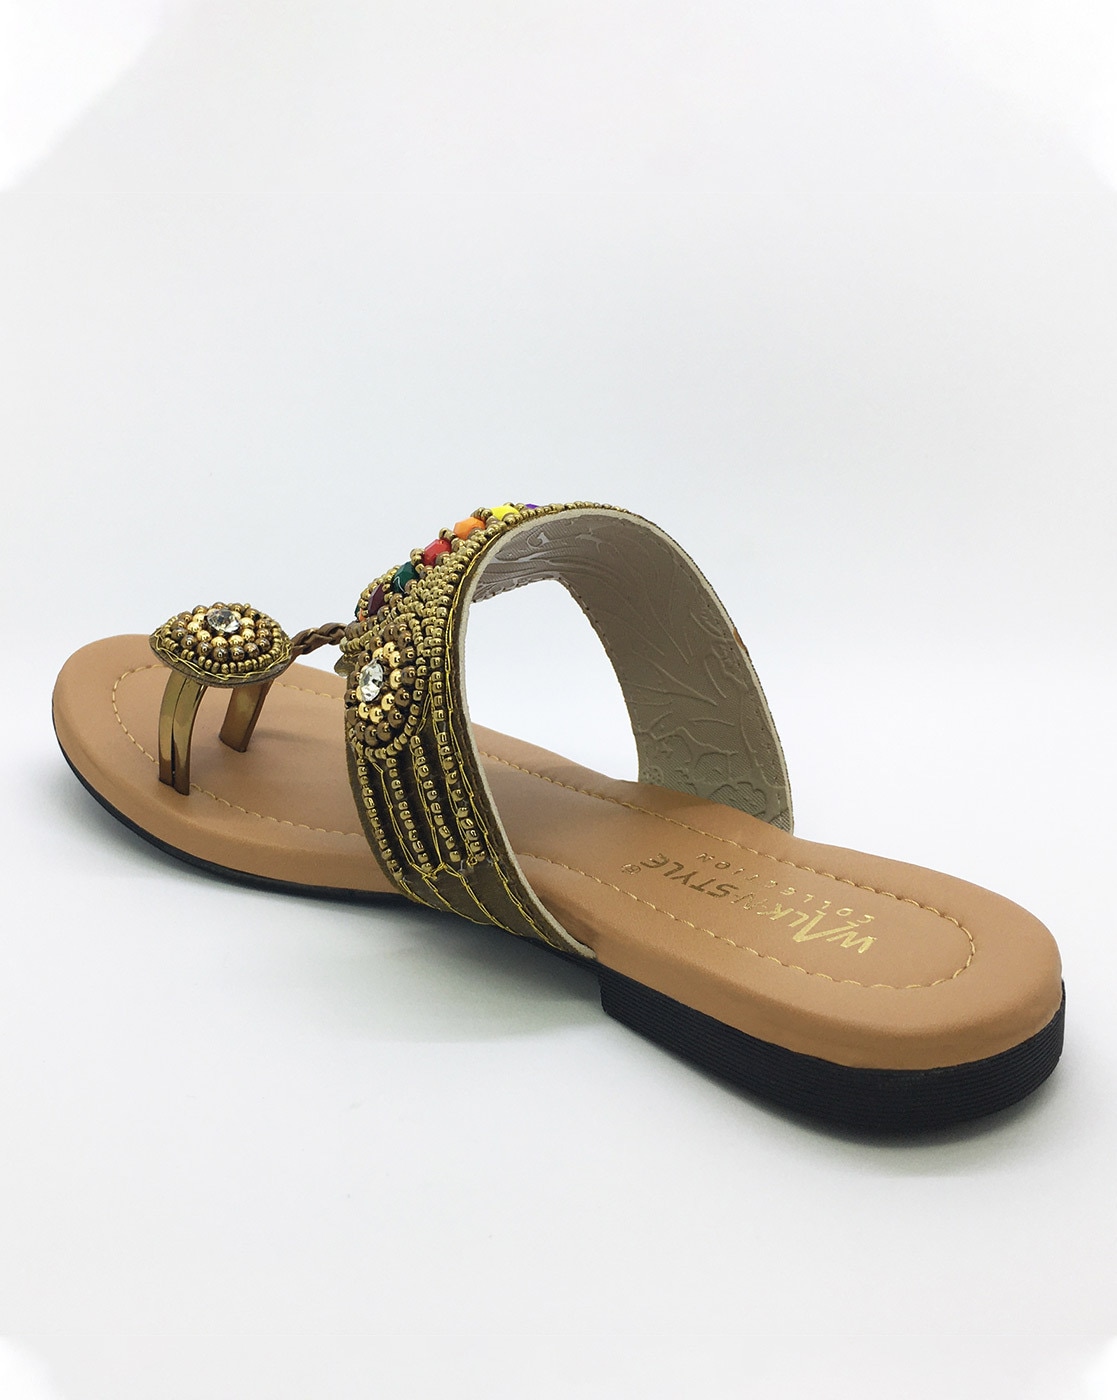 Amazon.com: Meshin Women Sandals Handmade Open Toe Sandals Ethnic Style  Flat Sandals Women Casual Shoes Slippers Fashion Summer Slipper Toe Ring  Sandals : Clothing, Shoes & Jewelry